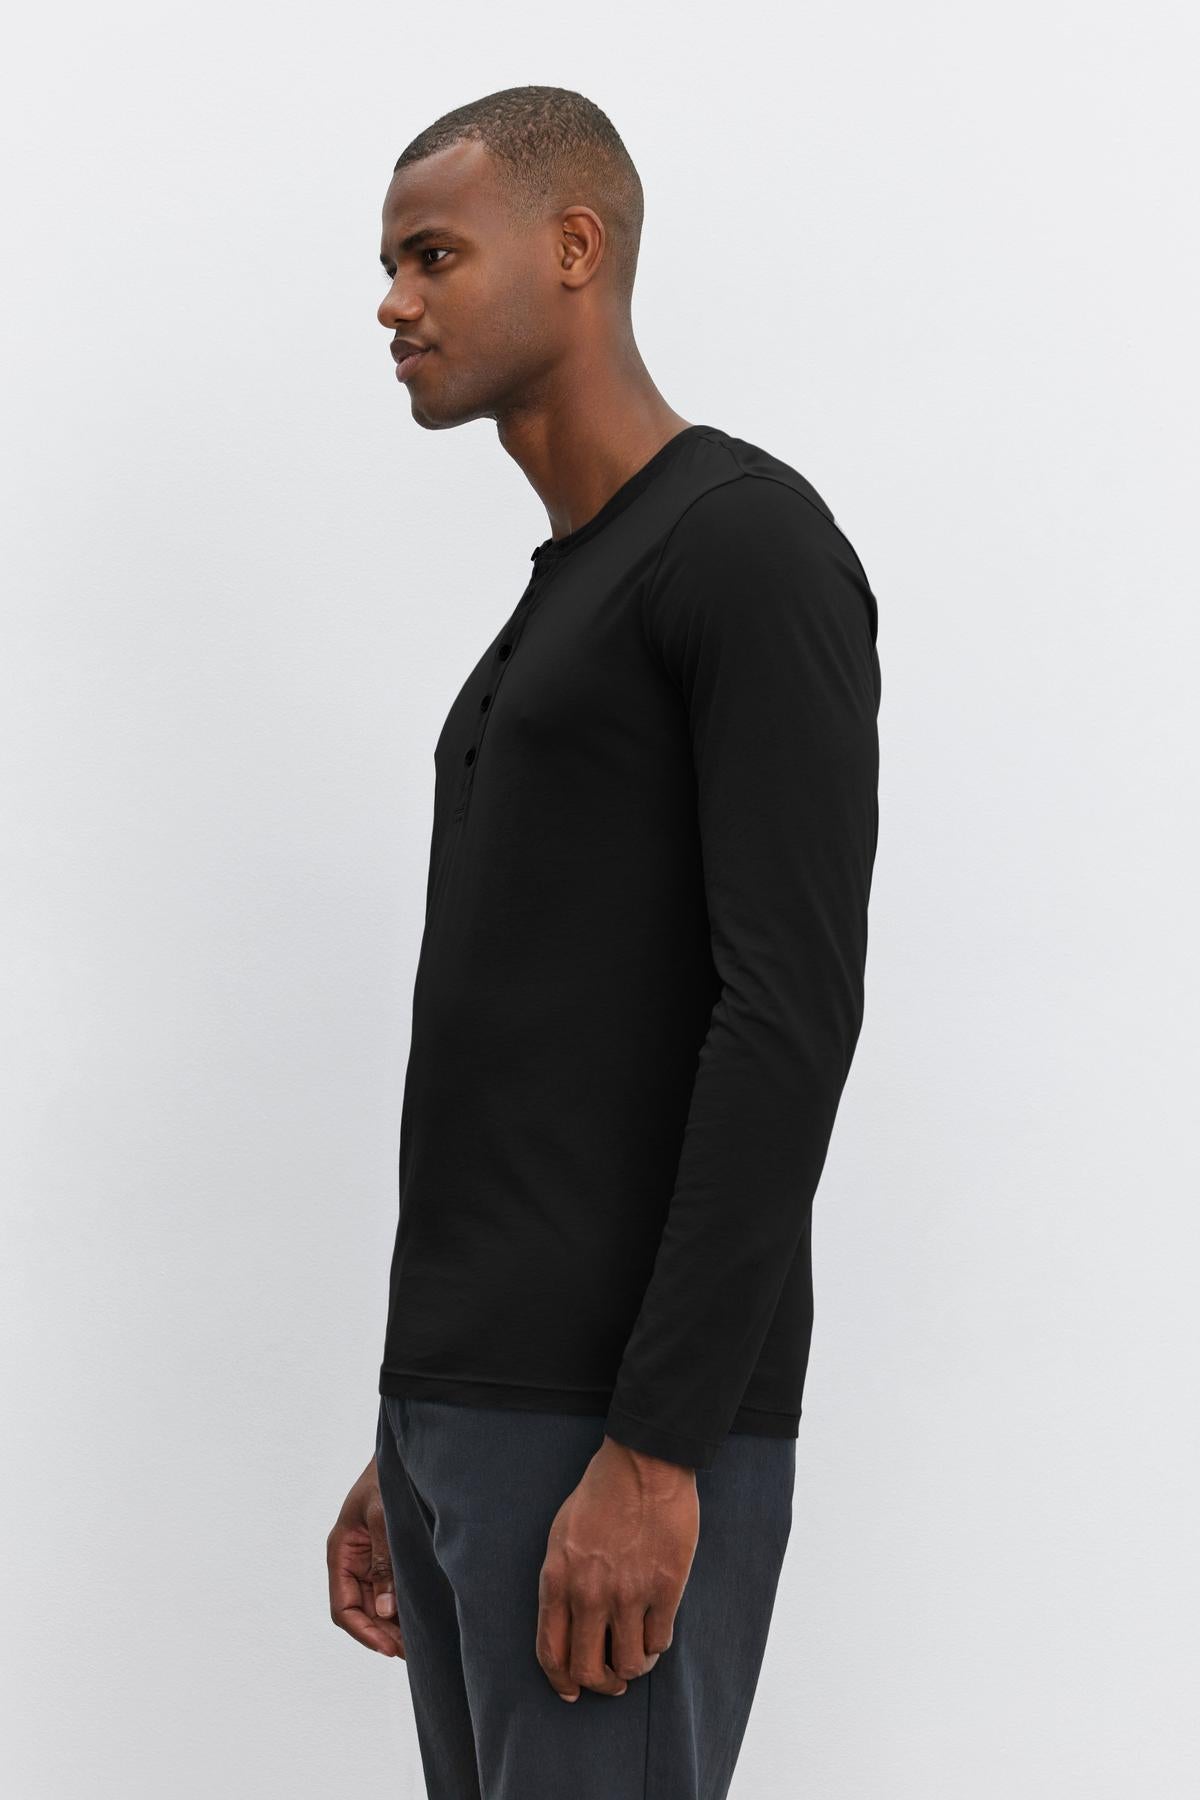 A man wearing a black lightweight ALVARO HENLEY by Velvet by Graham & Spencer and dark trousers stands against a plain white background, looking to the left.-36273890459841